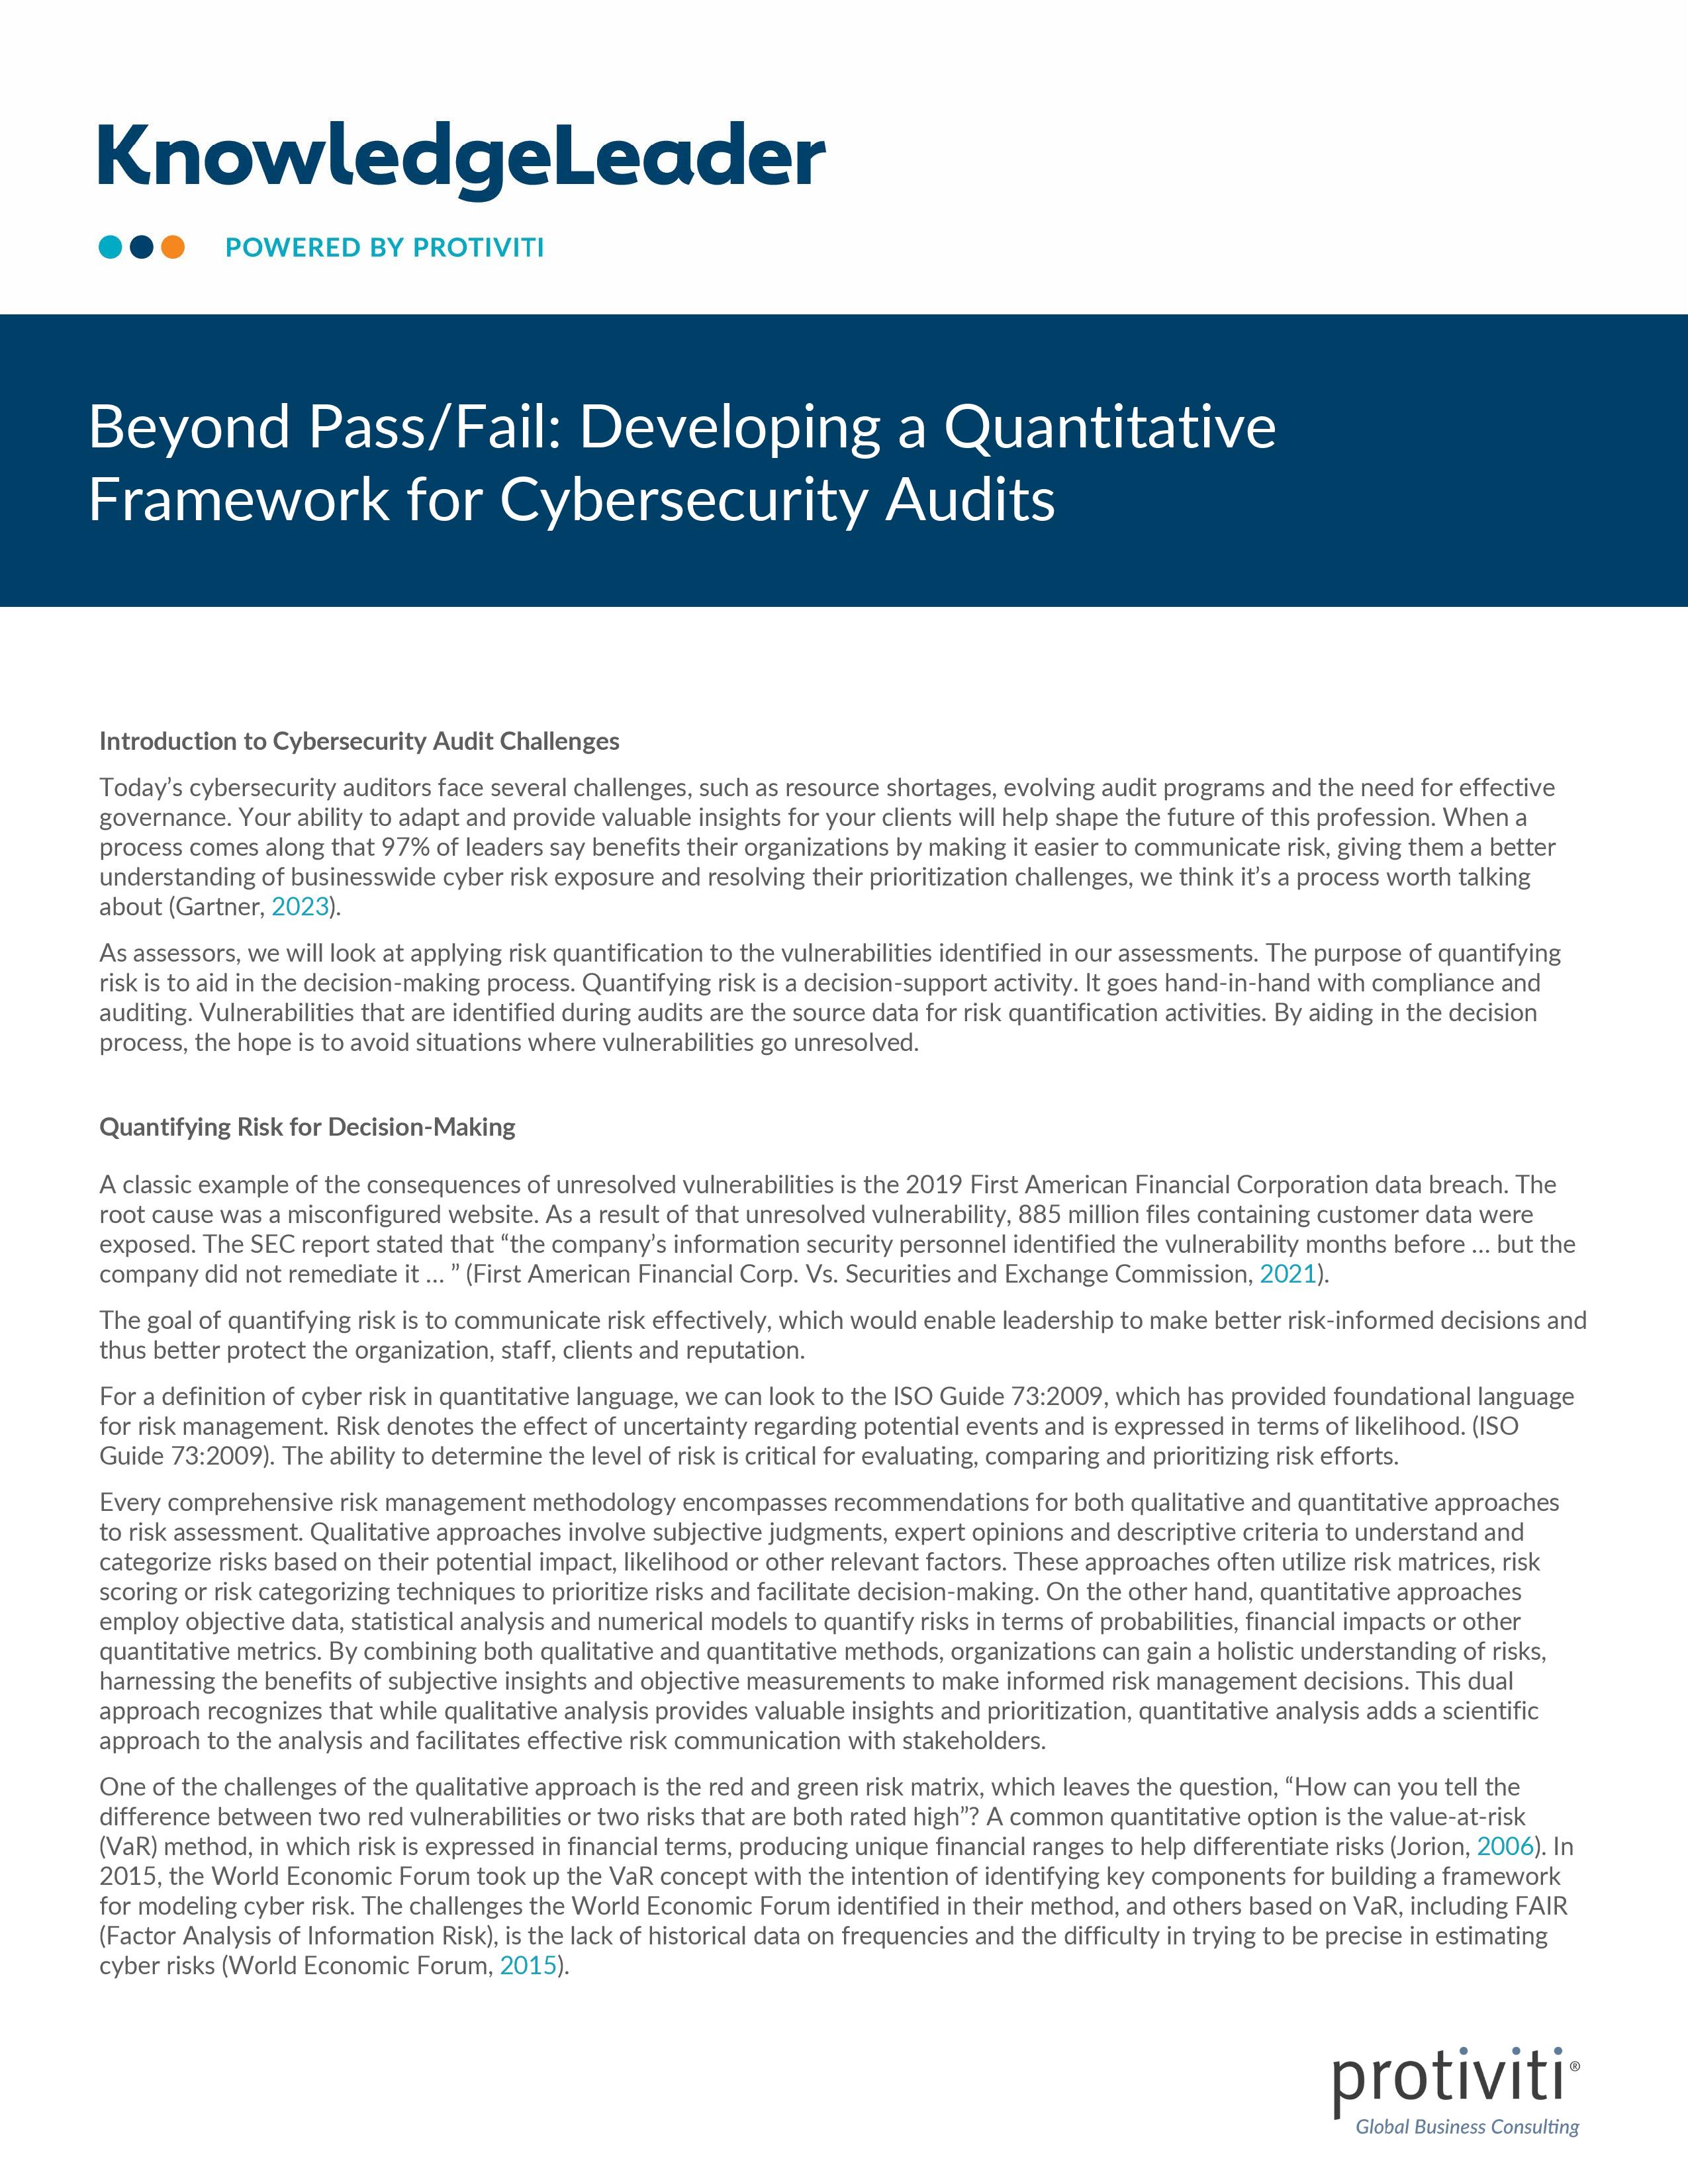 screenshot of the first page of Beyond Pass Fail Developing a Quantitative Framework for Cybersecurity Audits